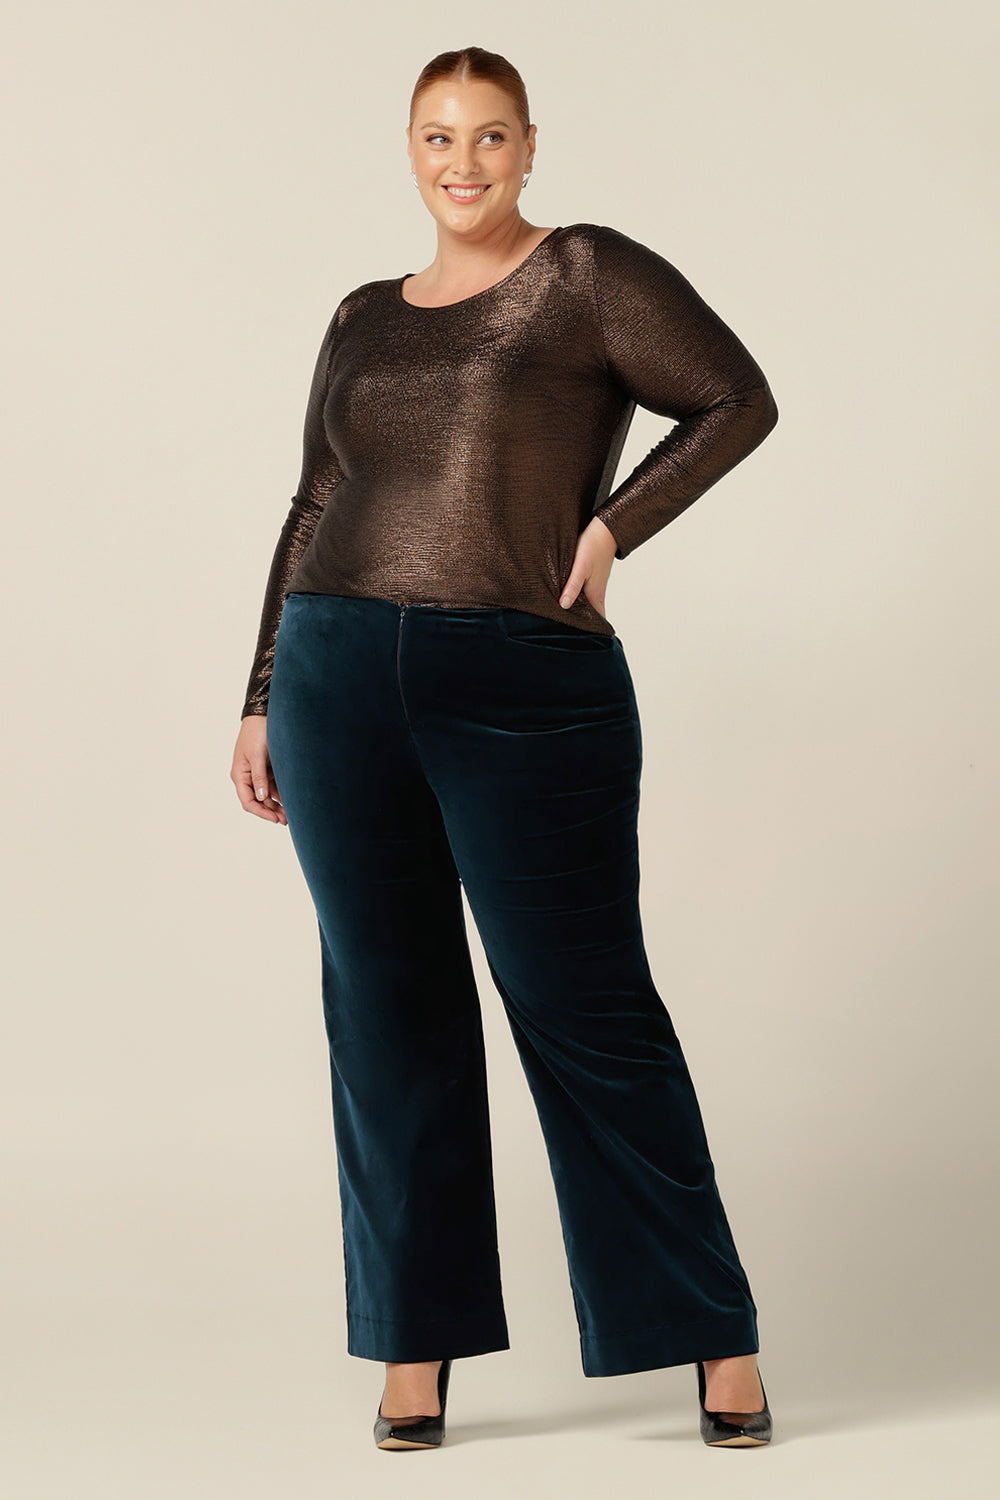 Evening and cocktail wear gets a touch of disco flare for plus size women with these bootcut leg, tailored pants in petrol green velveteen. Worn with a sparkly mocha brown, long sleeve top for eveningwear, these special event pants are made in Australia in sizes 8 to 24.